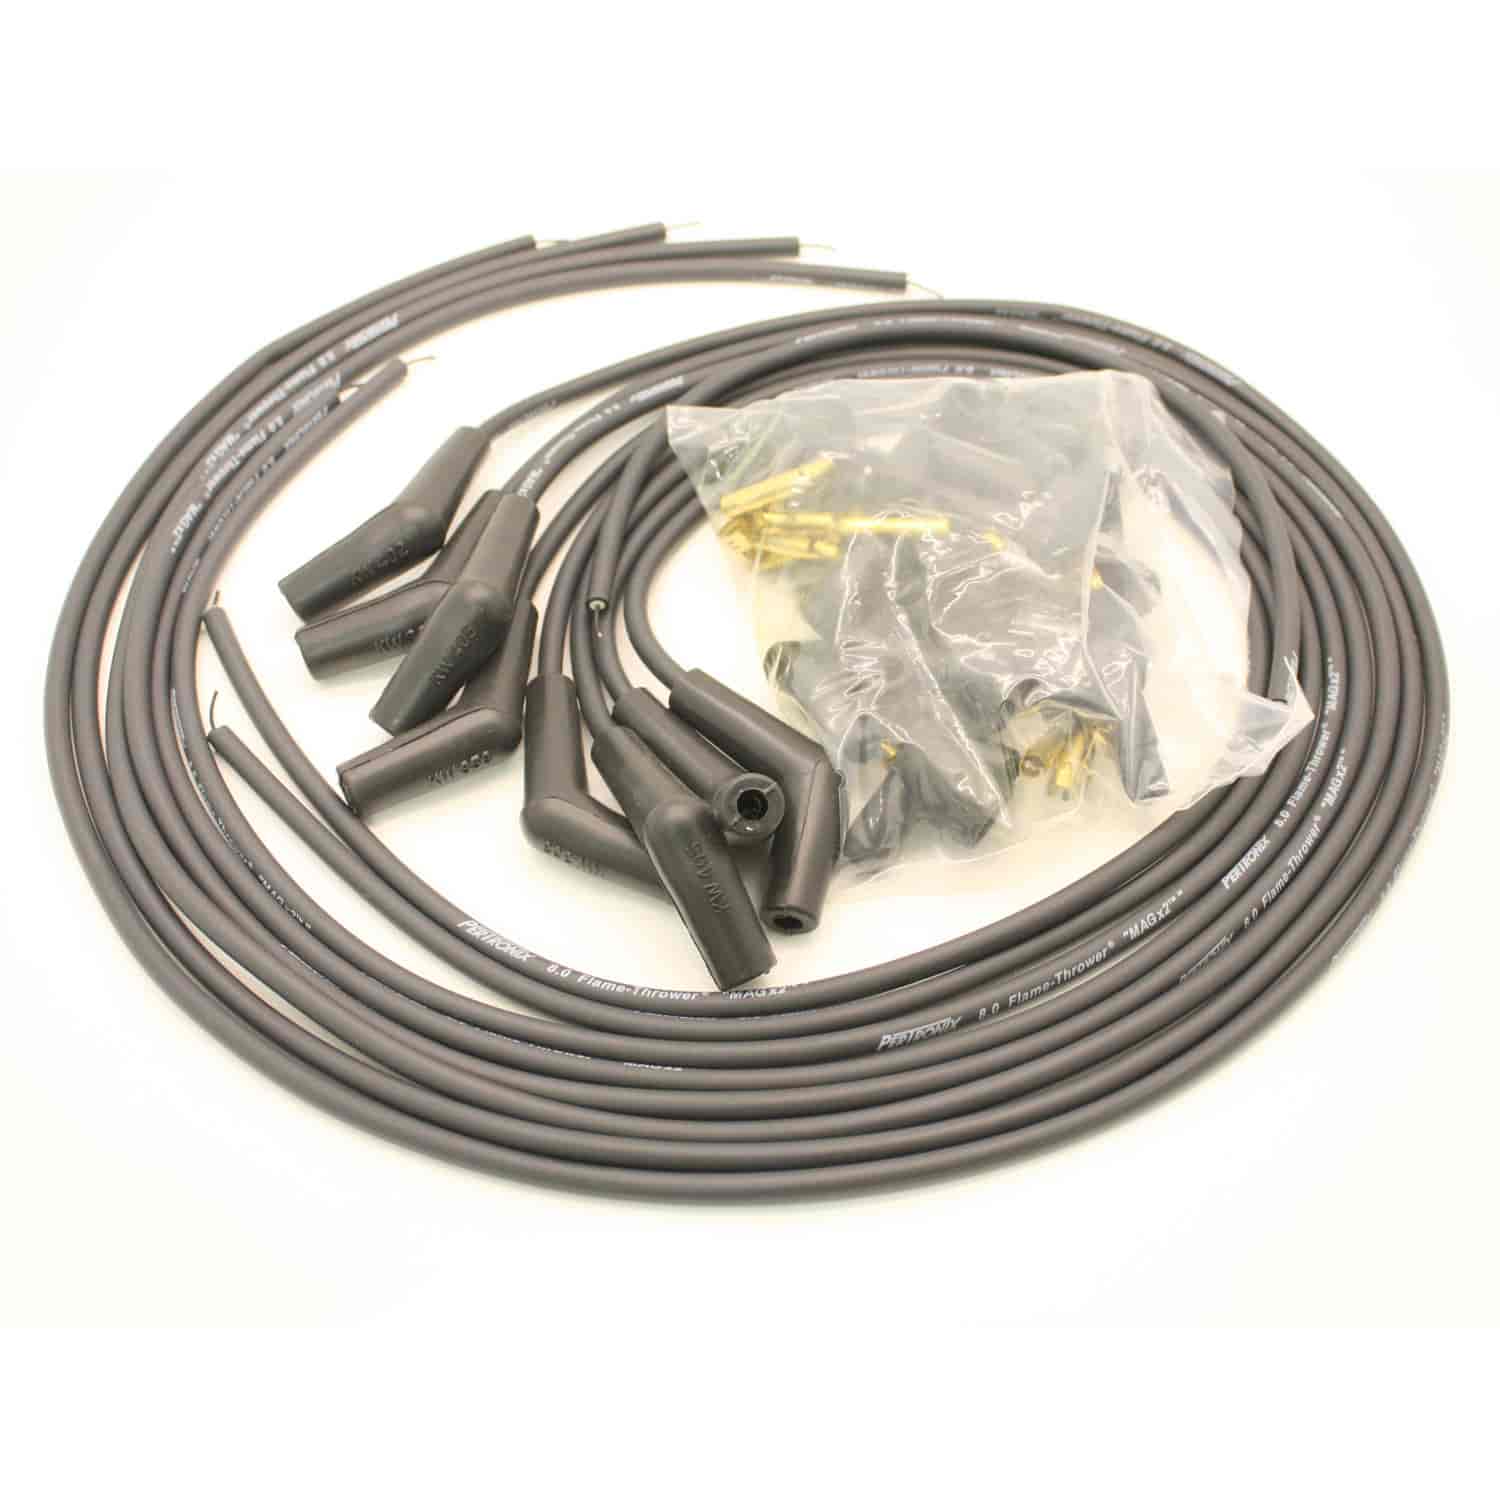 PerTronix 808490 Flame-Thrower Spark Plug Wires 8 cyl 8mm Universal 90 –  Pertronix